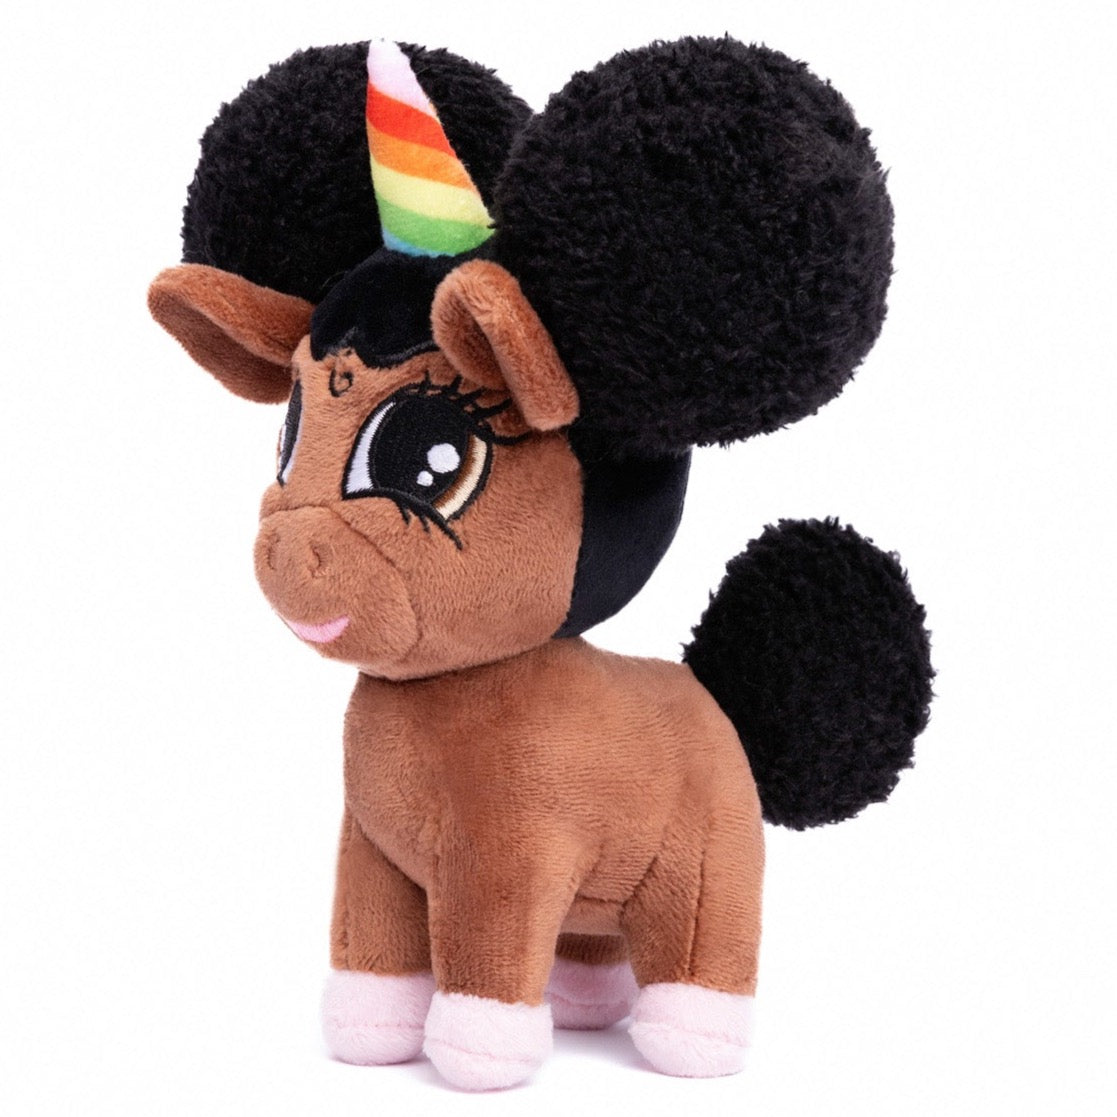 Baby Chloe Unicorn Plush Toy with Afro Puffs (standing) - 6 inch